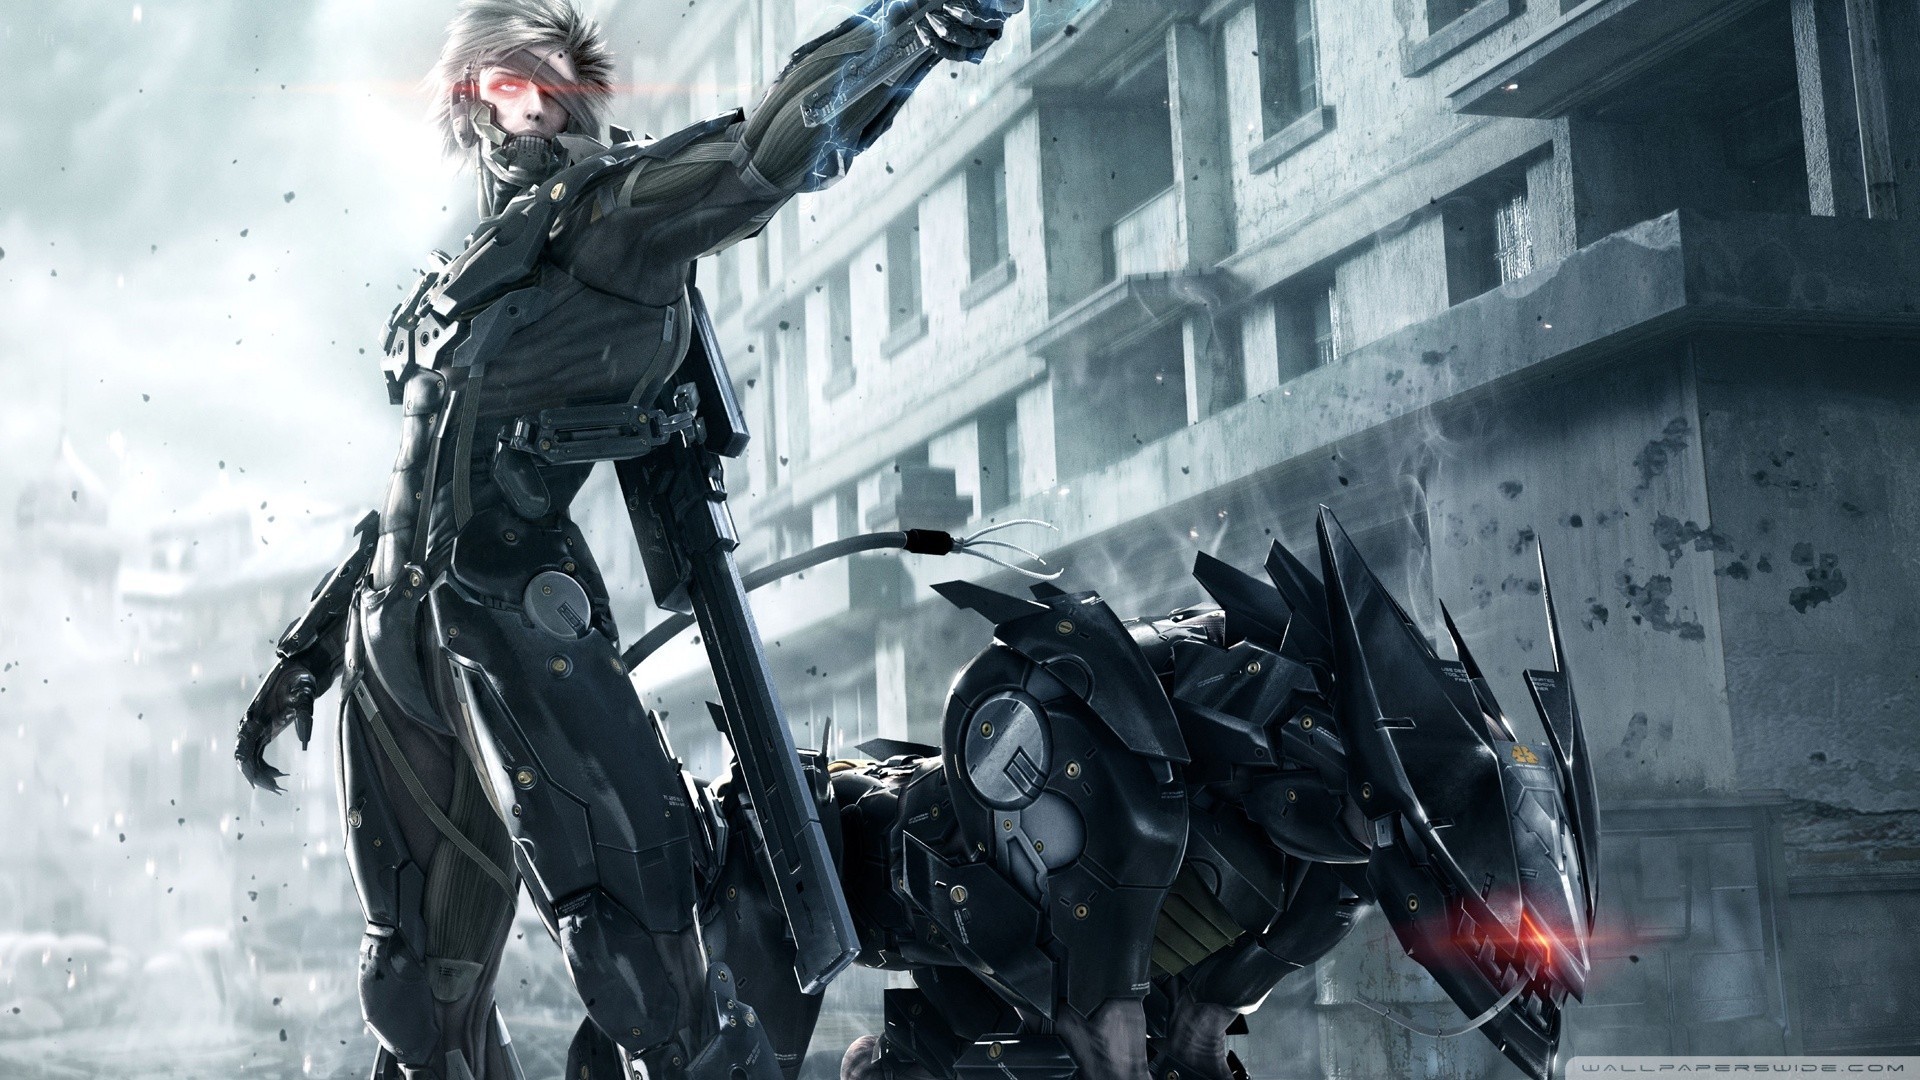 Free photo A picture from the game Metal Gear Rising Revengeance